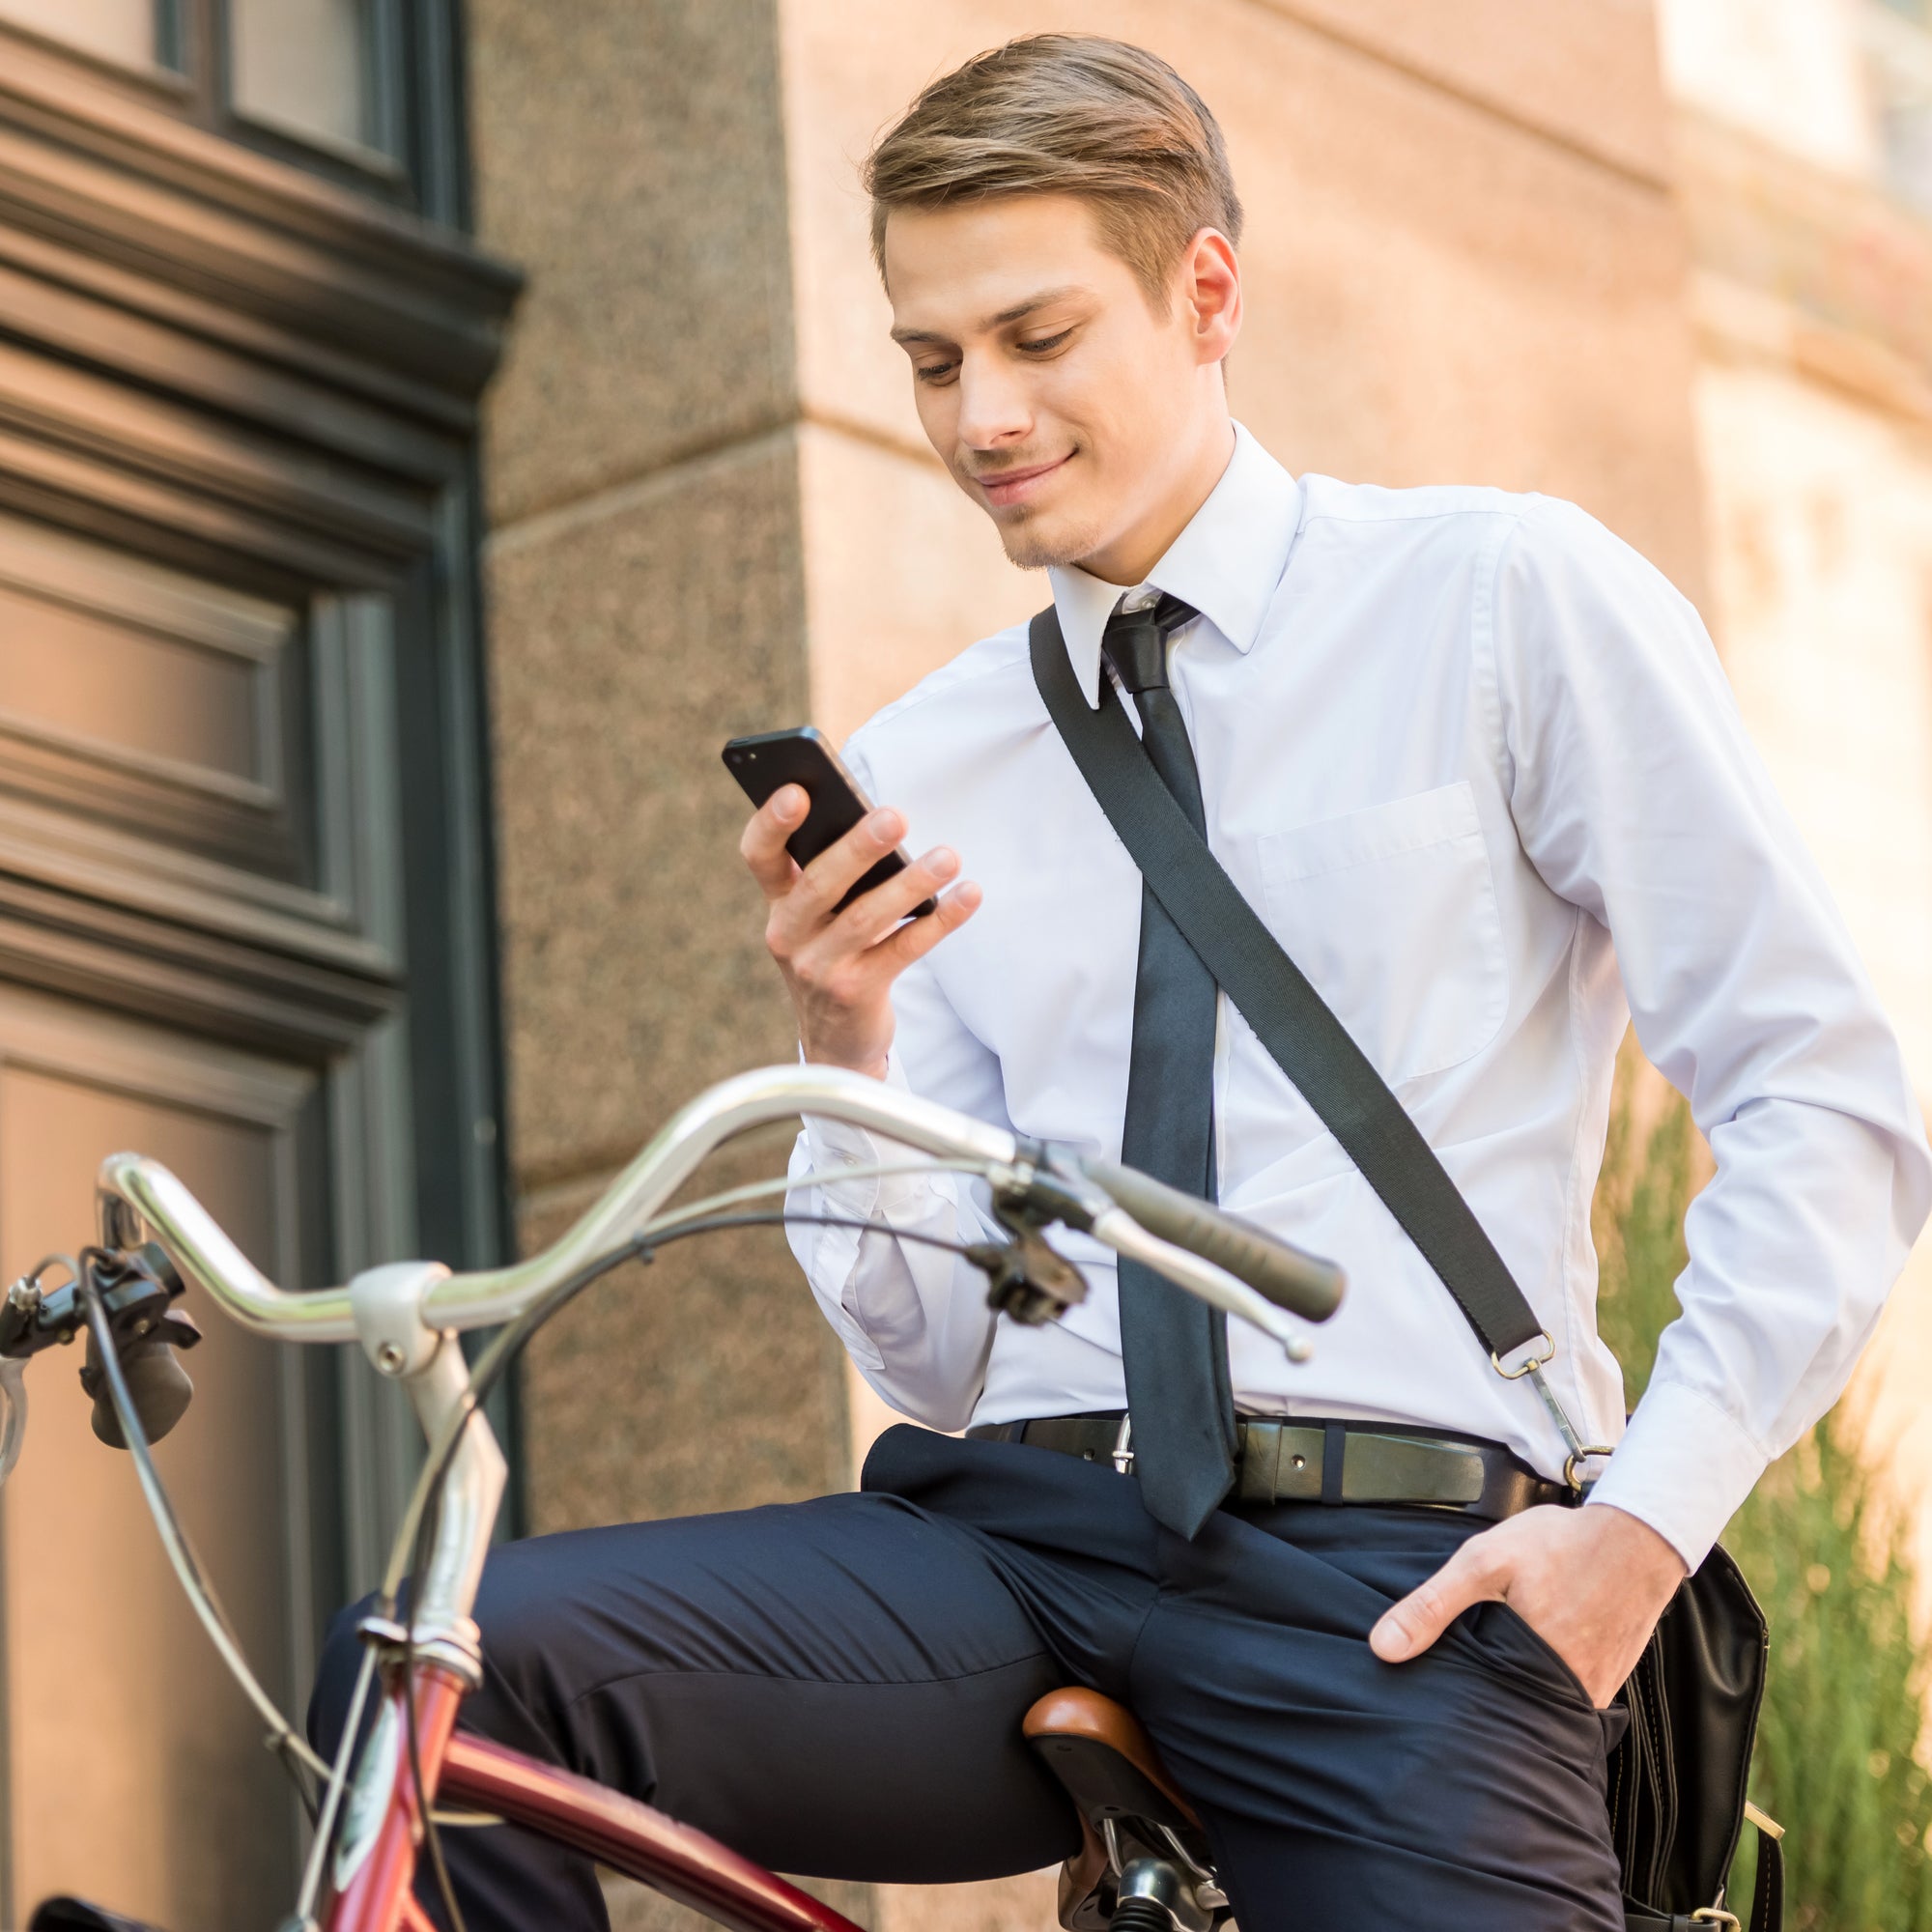 How To Transition From Bike To The Office In 10 Minutes